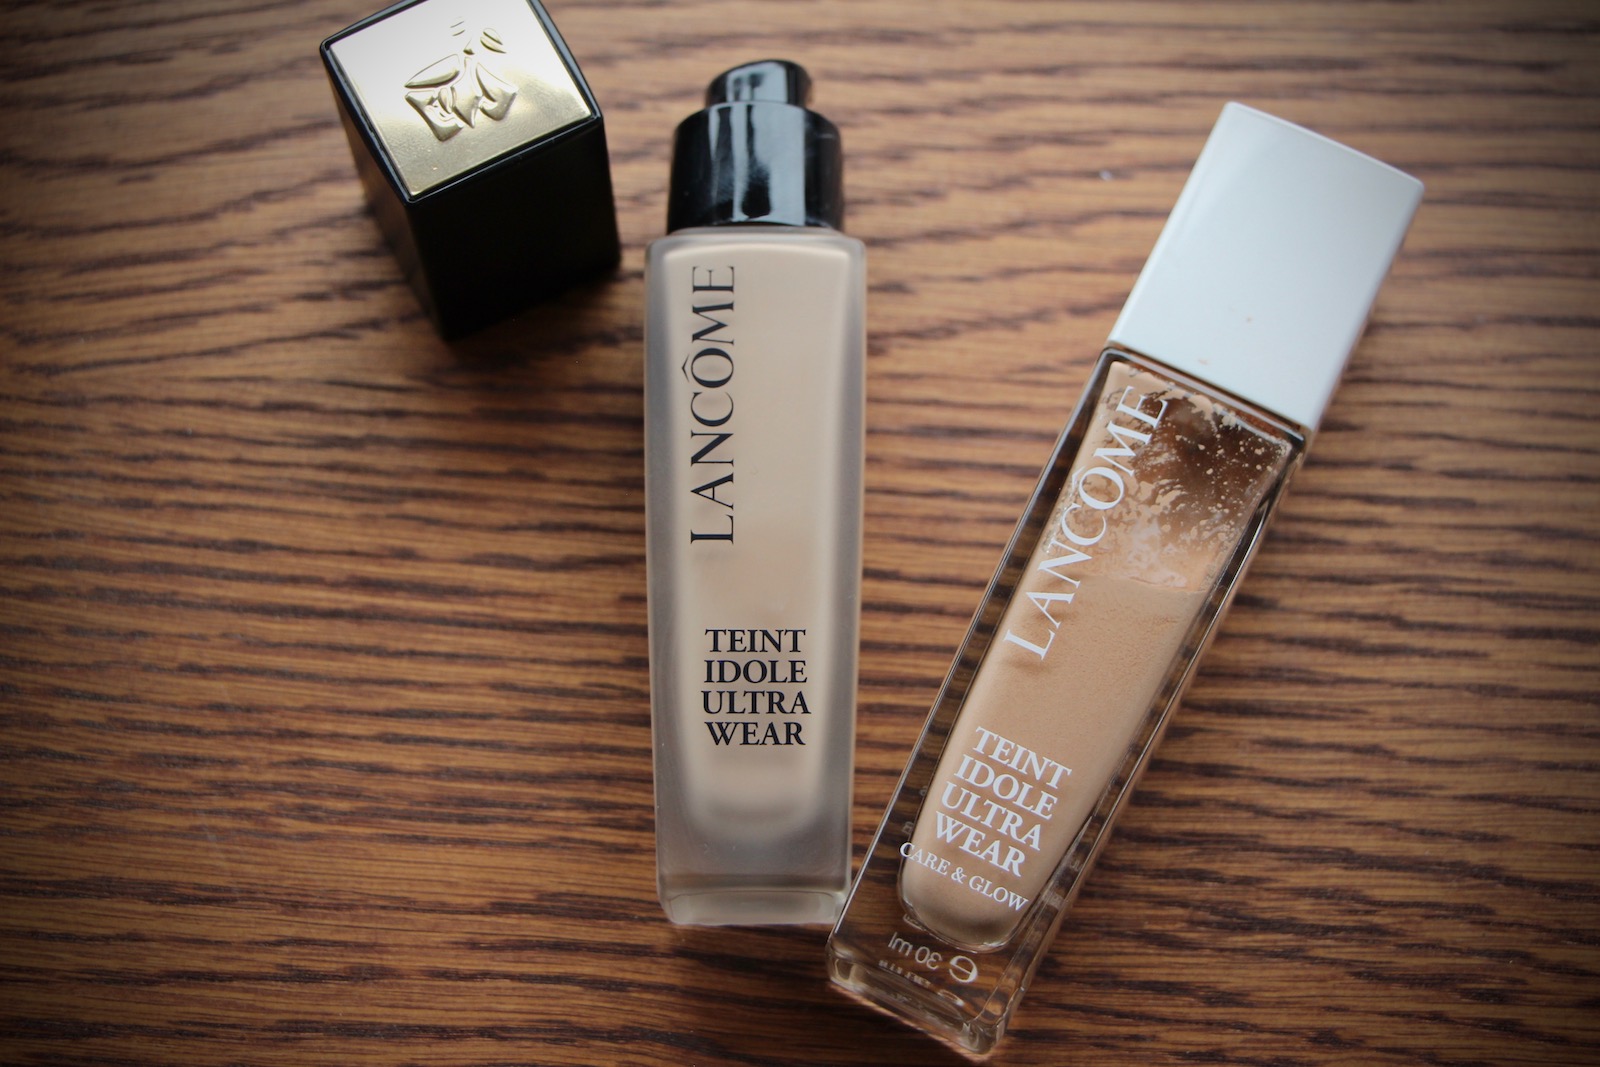 New Lancome Teint Idole Ultra Wear Foundation Review - Ruth Crilly